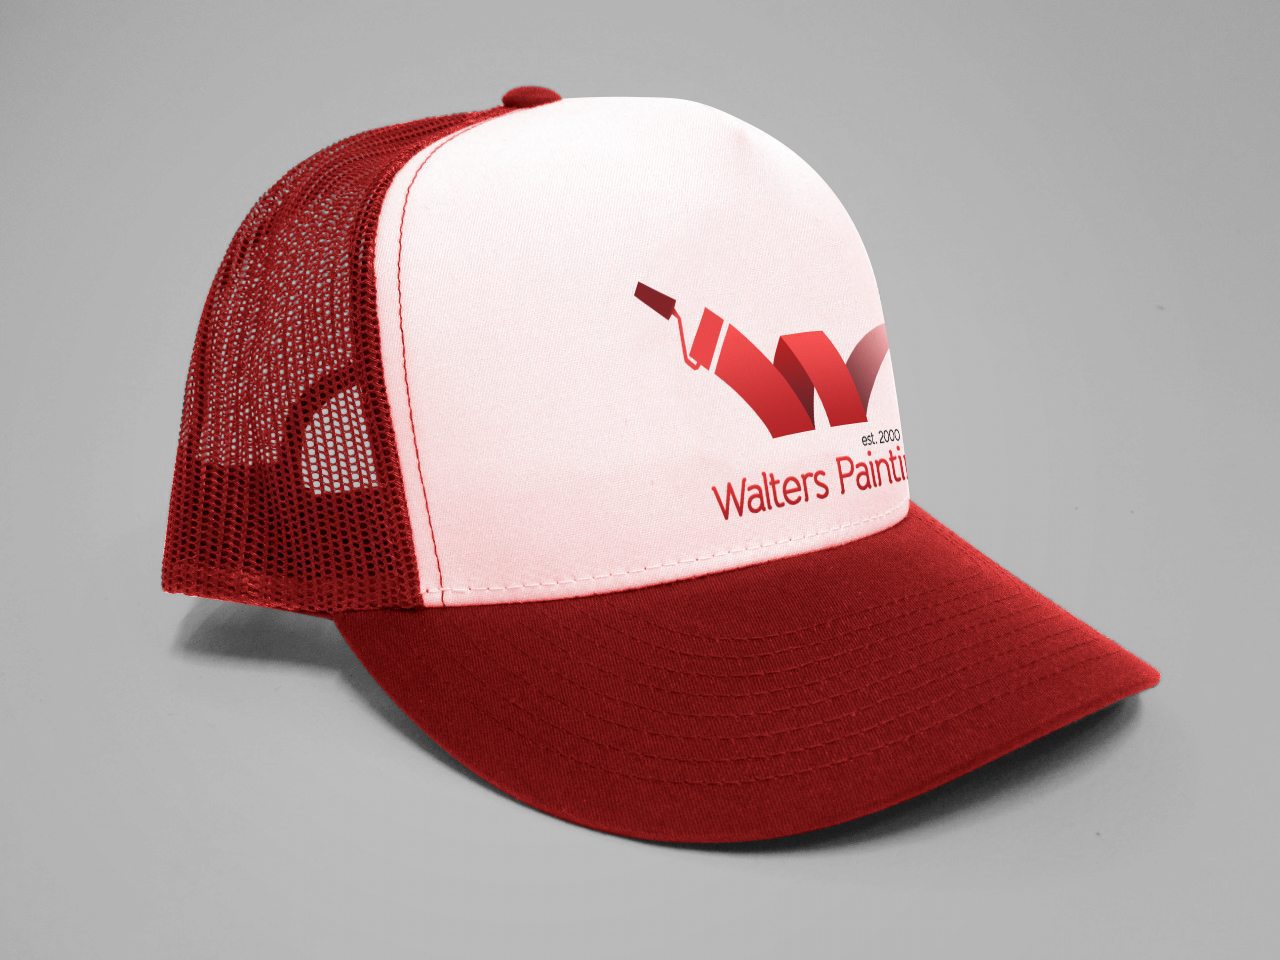 Walters Painting Branded Basecall Cap Design